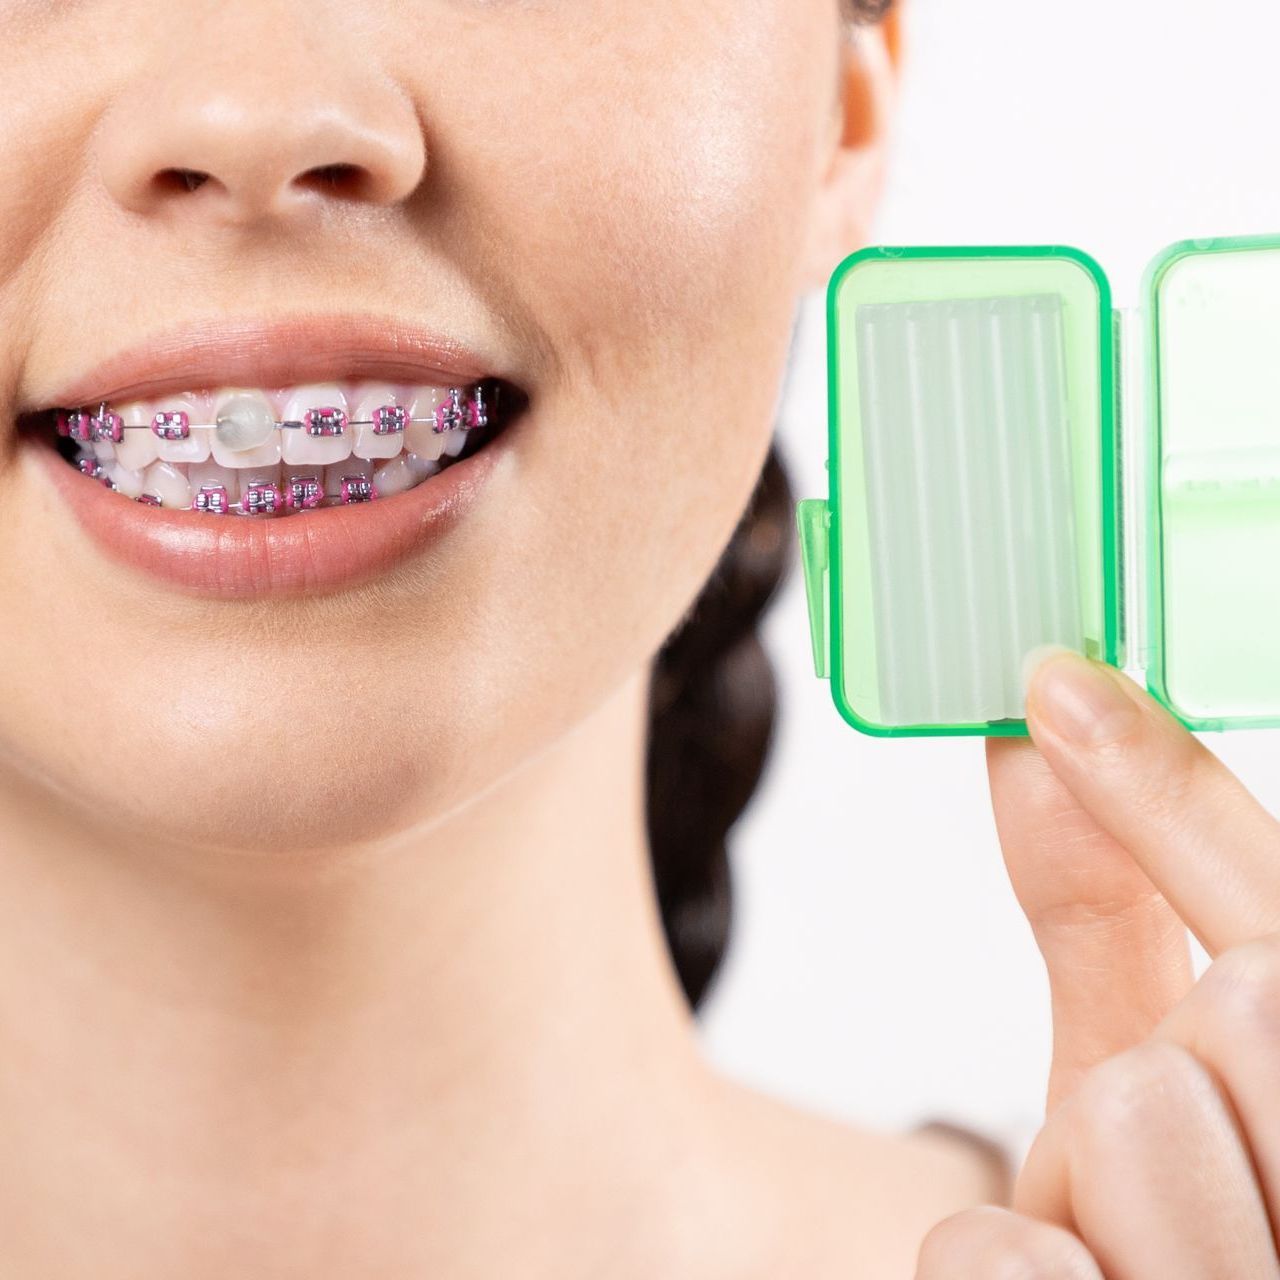 A woman with braces on her teeth is holding a green box